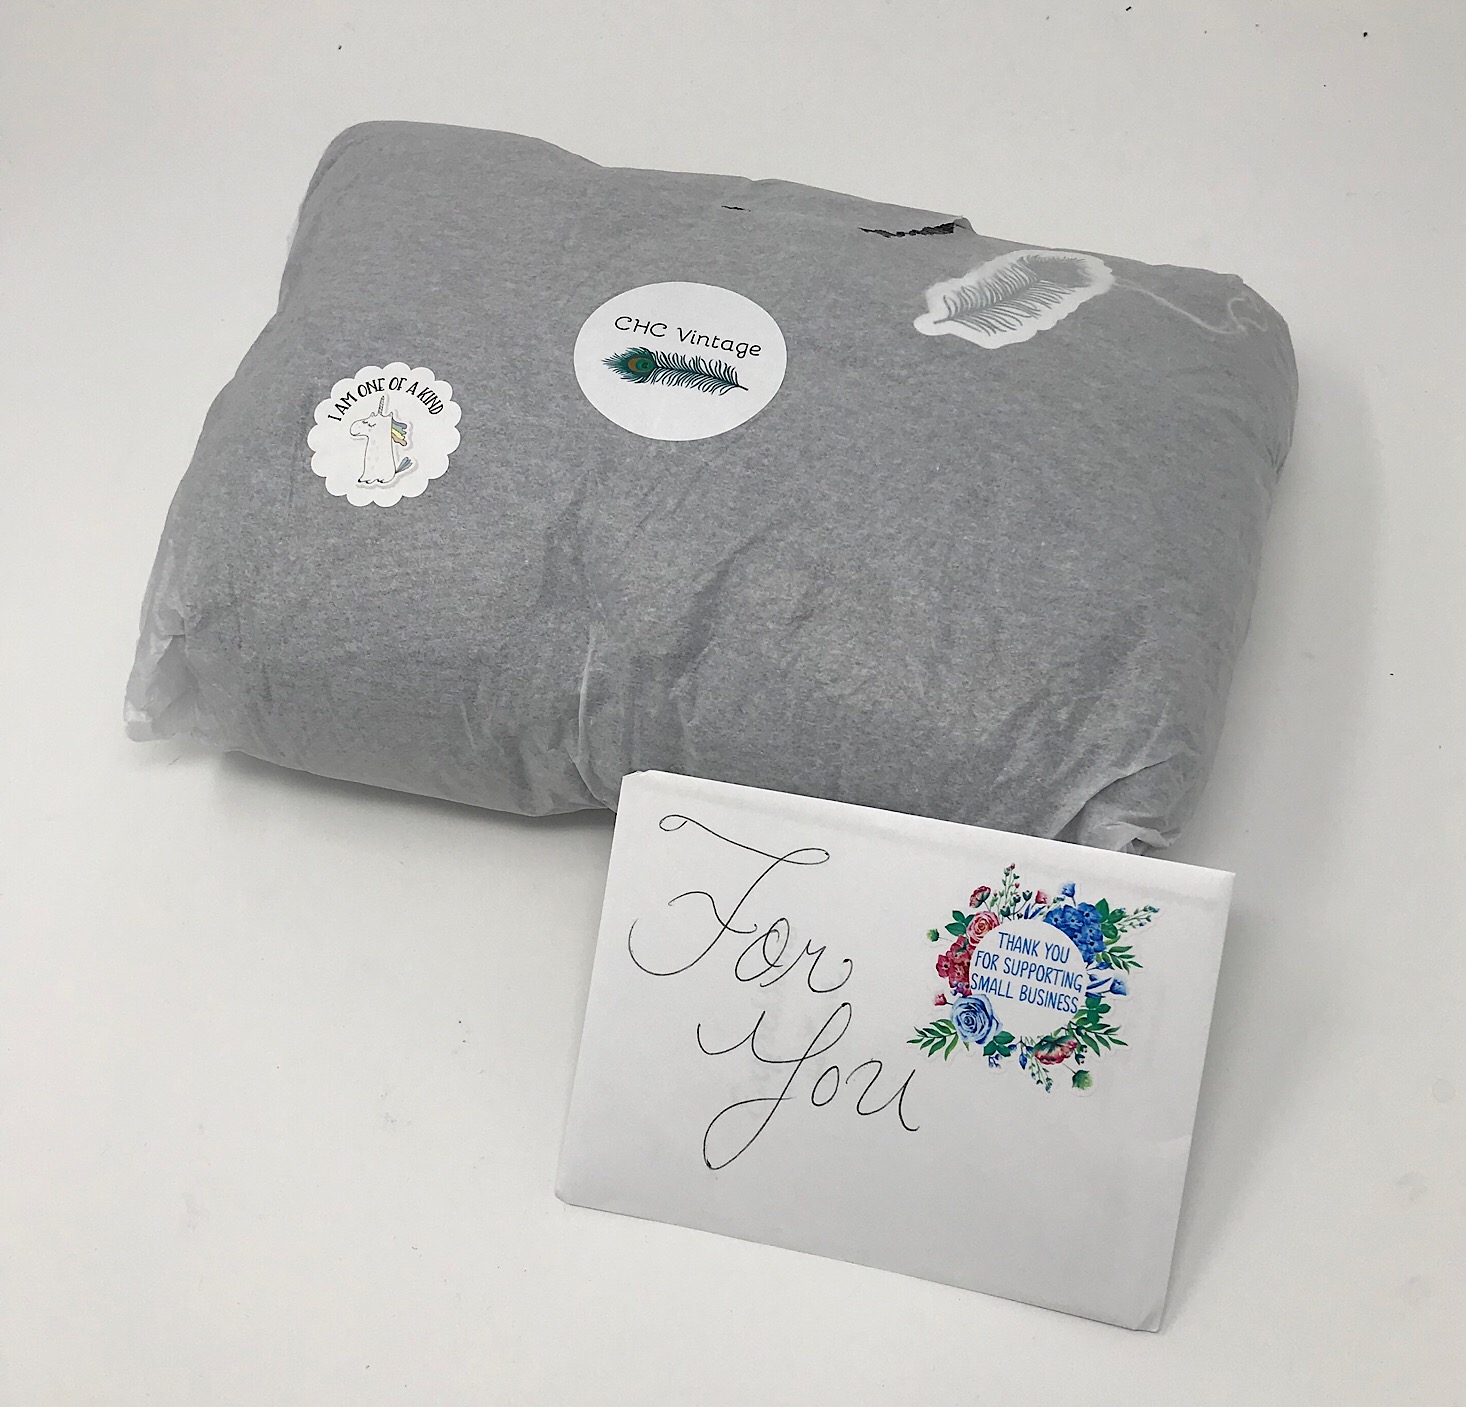 CHC Vintage Clothing Subscription Box Review – November 2018